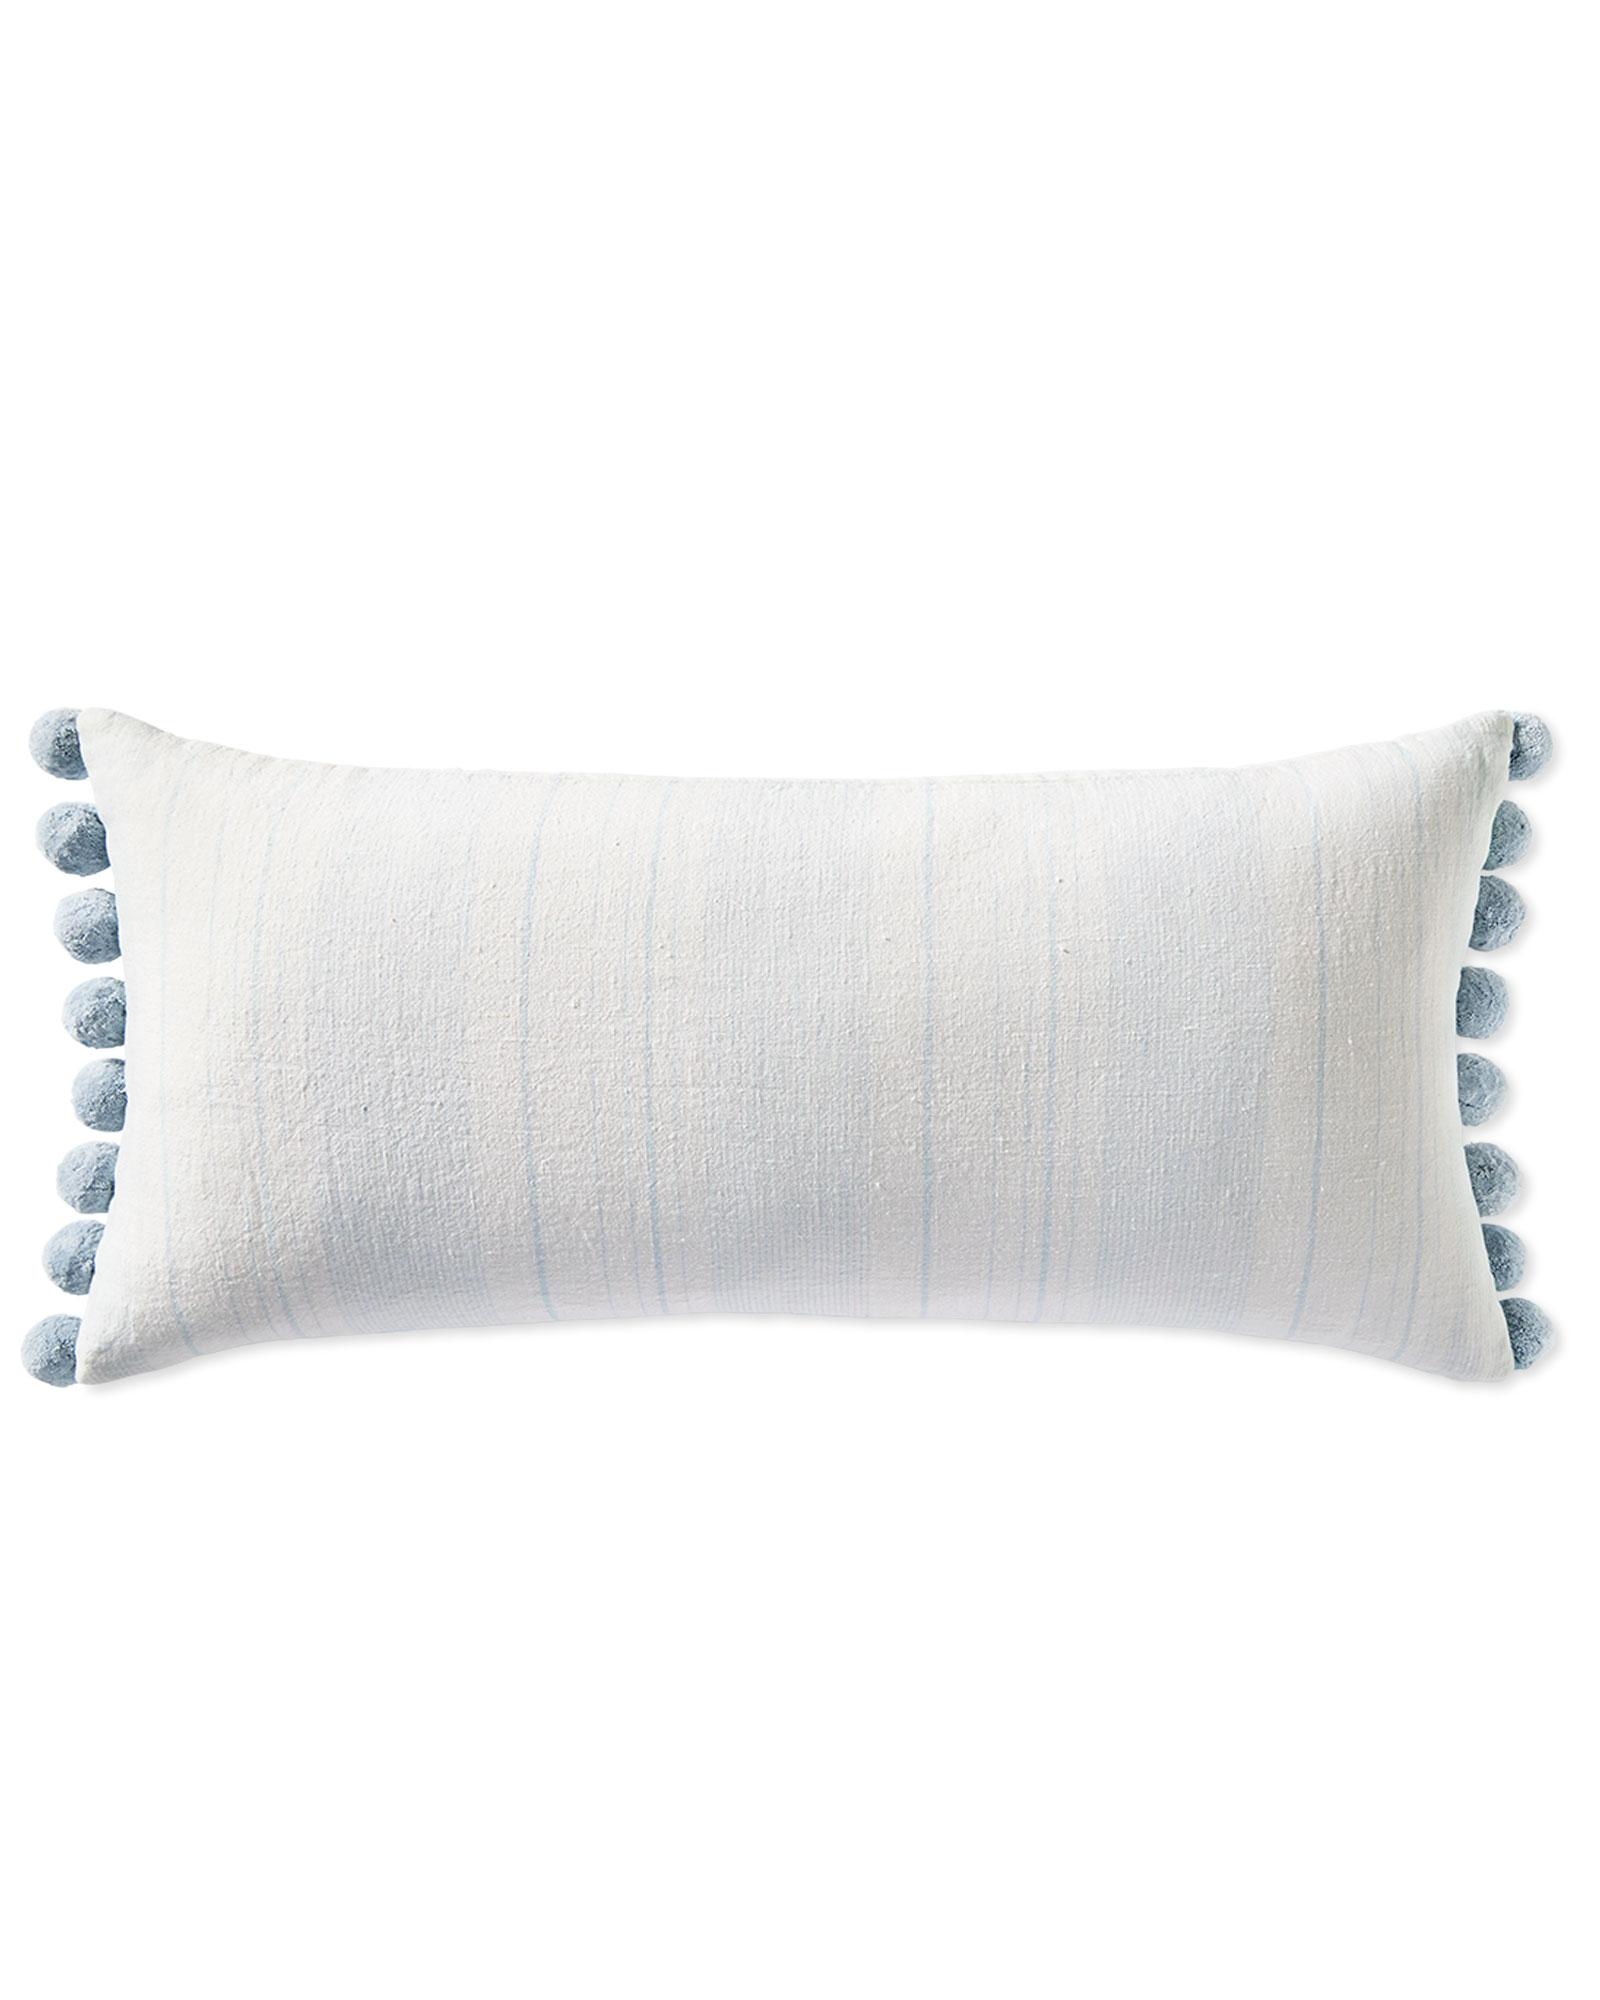 Indoor Pillow Inserts, 14 x 30 | Serena & Lily